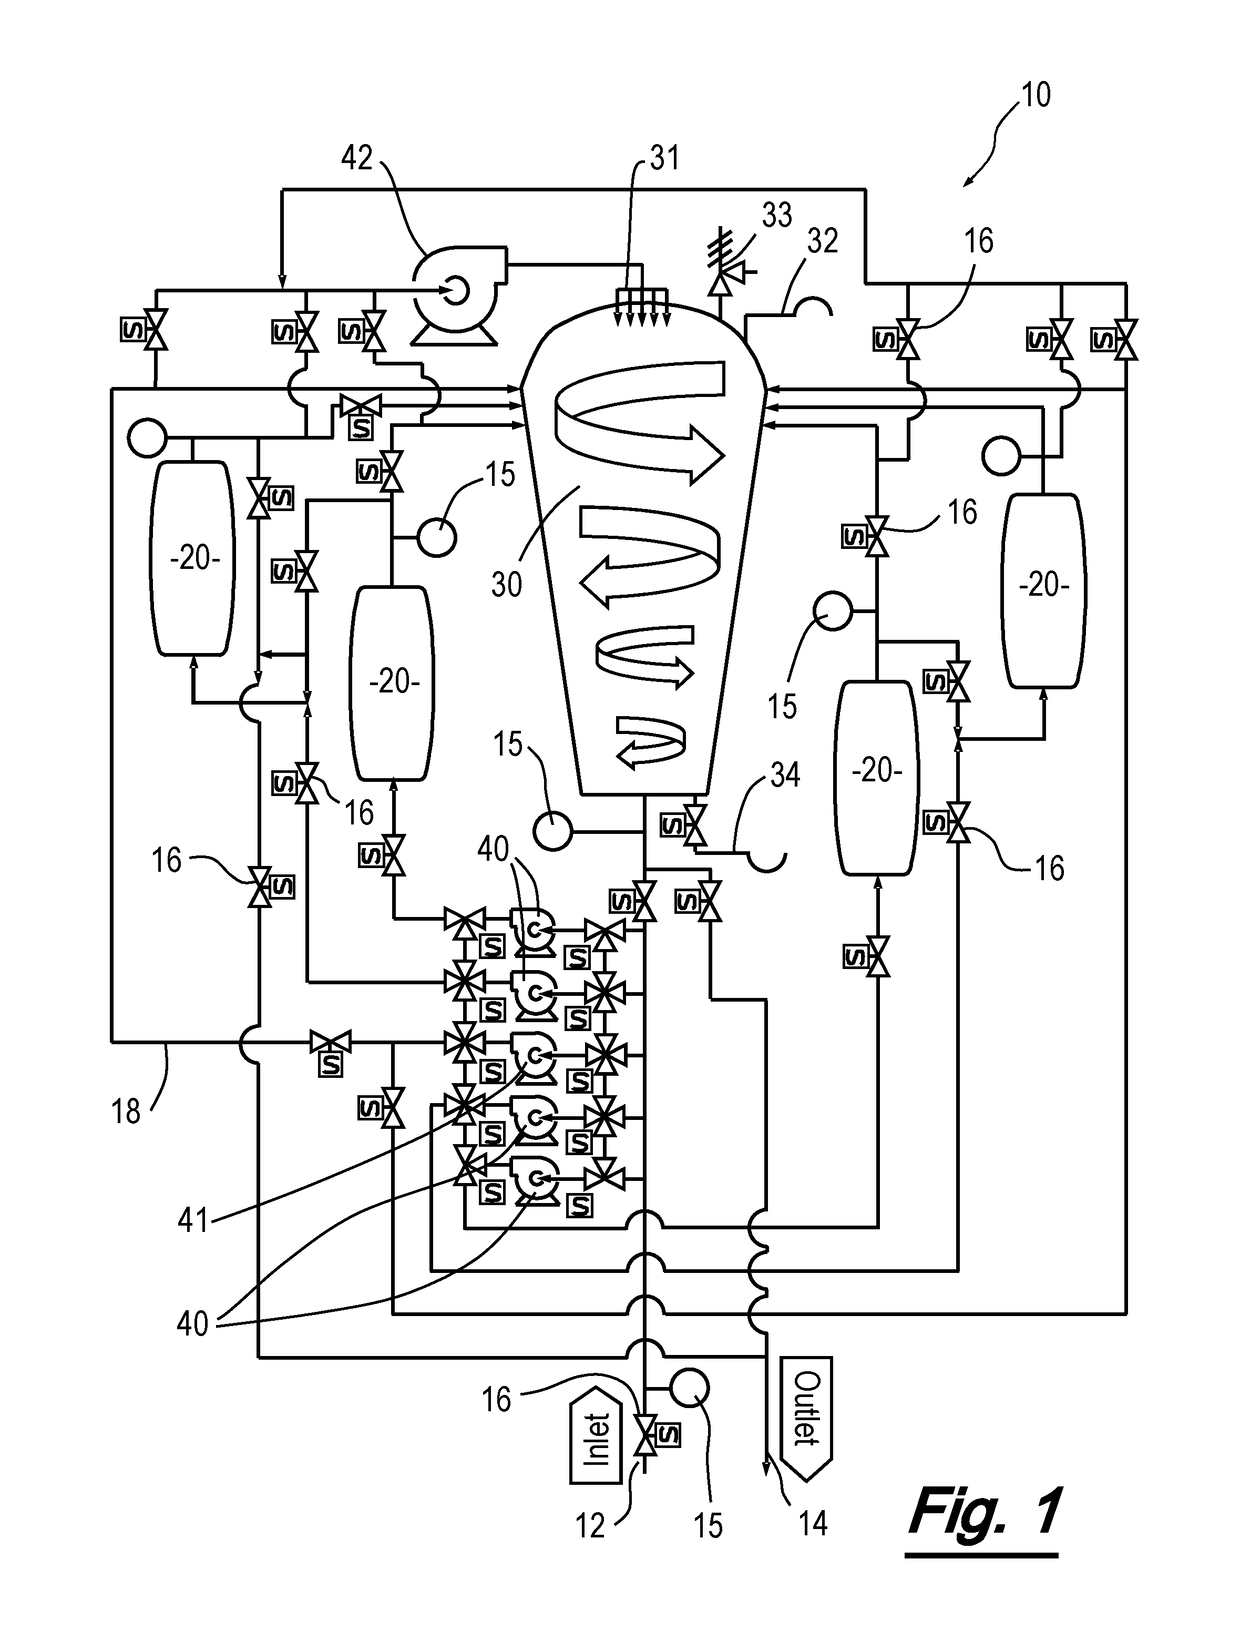 Apparatus and method for water treatment